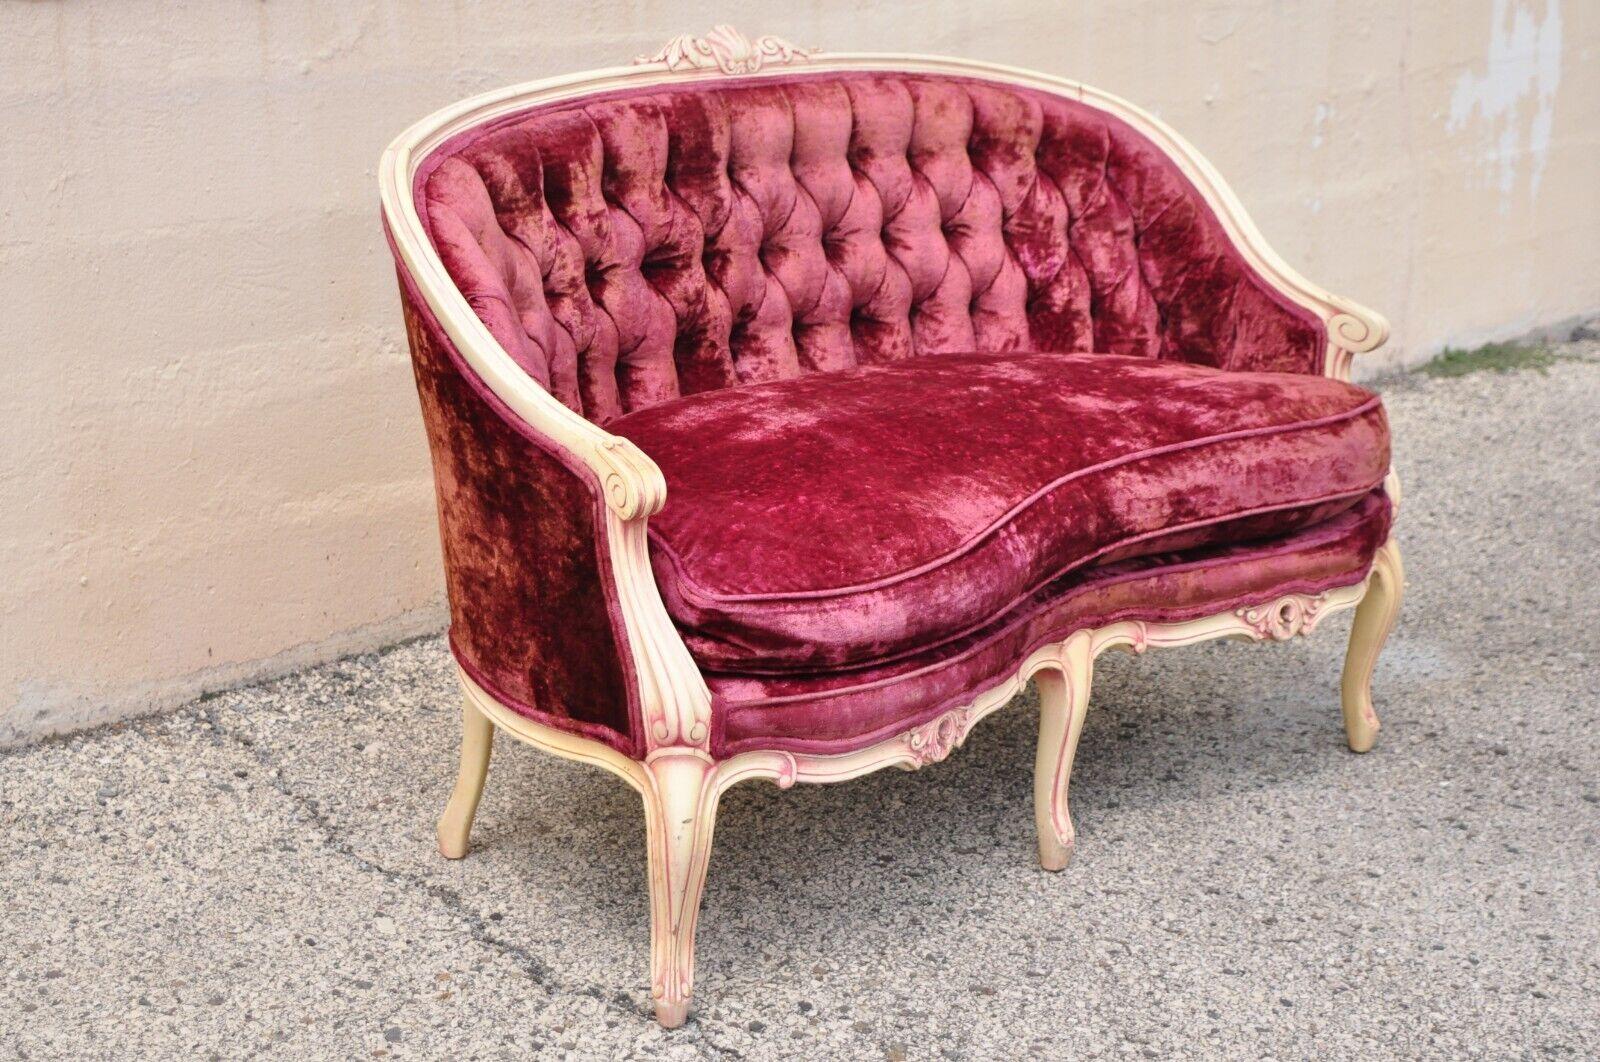 Vintage French Provincial Louis XV style Beige settee loveseat sofa with pink accents. Item features a cream lacquered finish, pink painted accents, serpentine front, solid wood frame, great style and form. Circa Mid 20th Century. Measurements: